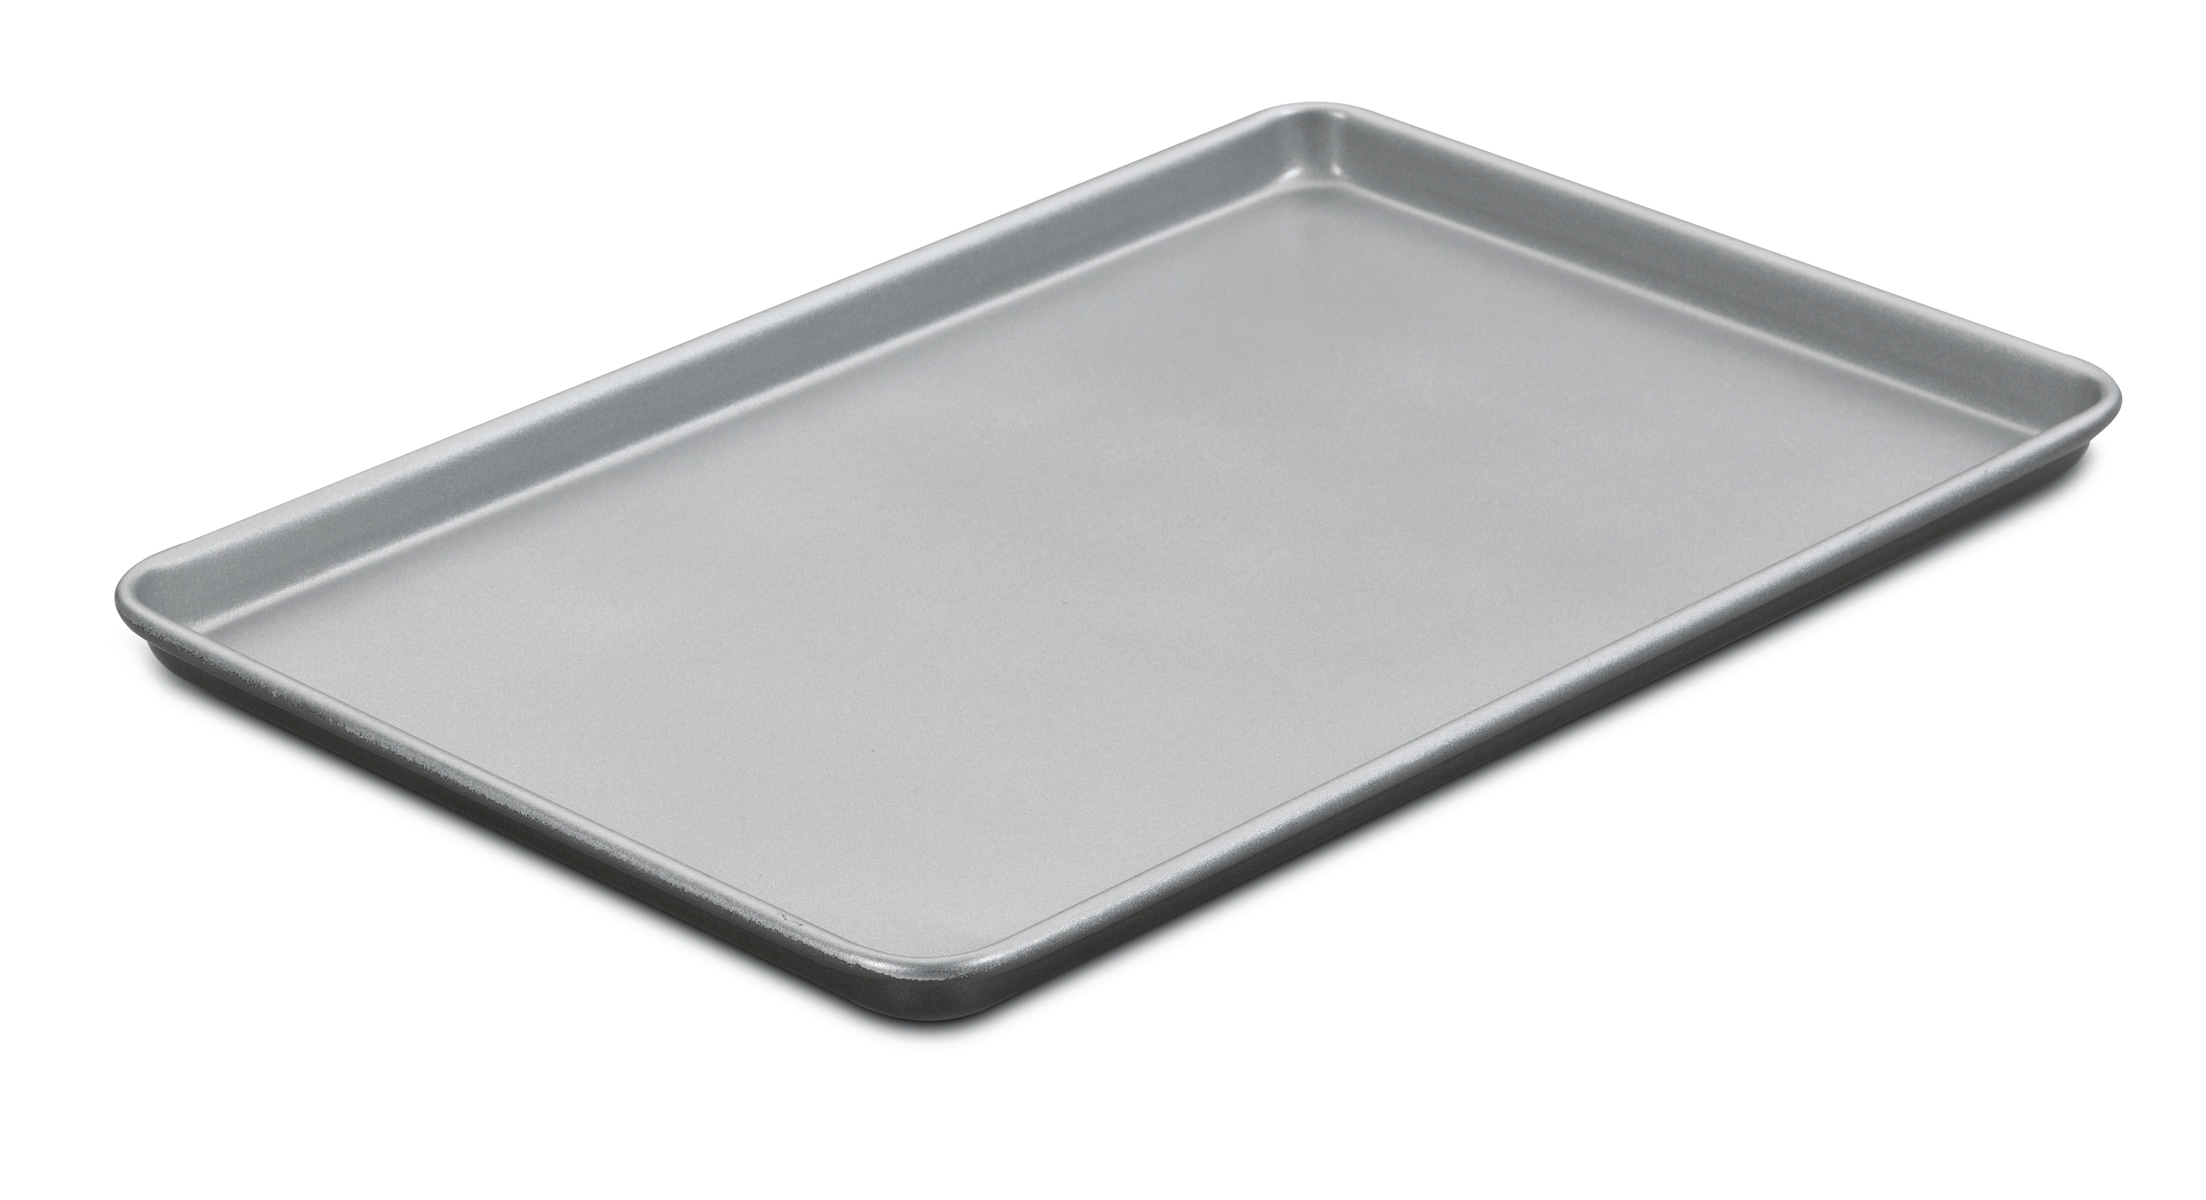 Spring Chef Aluminum Jelly Roll Pan, Baking Cookie Sheet For Oven, Hea